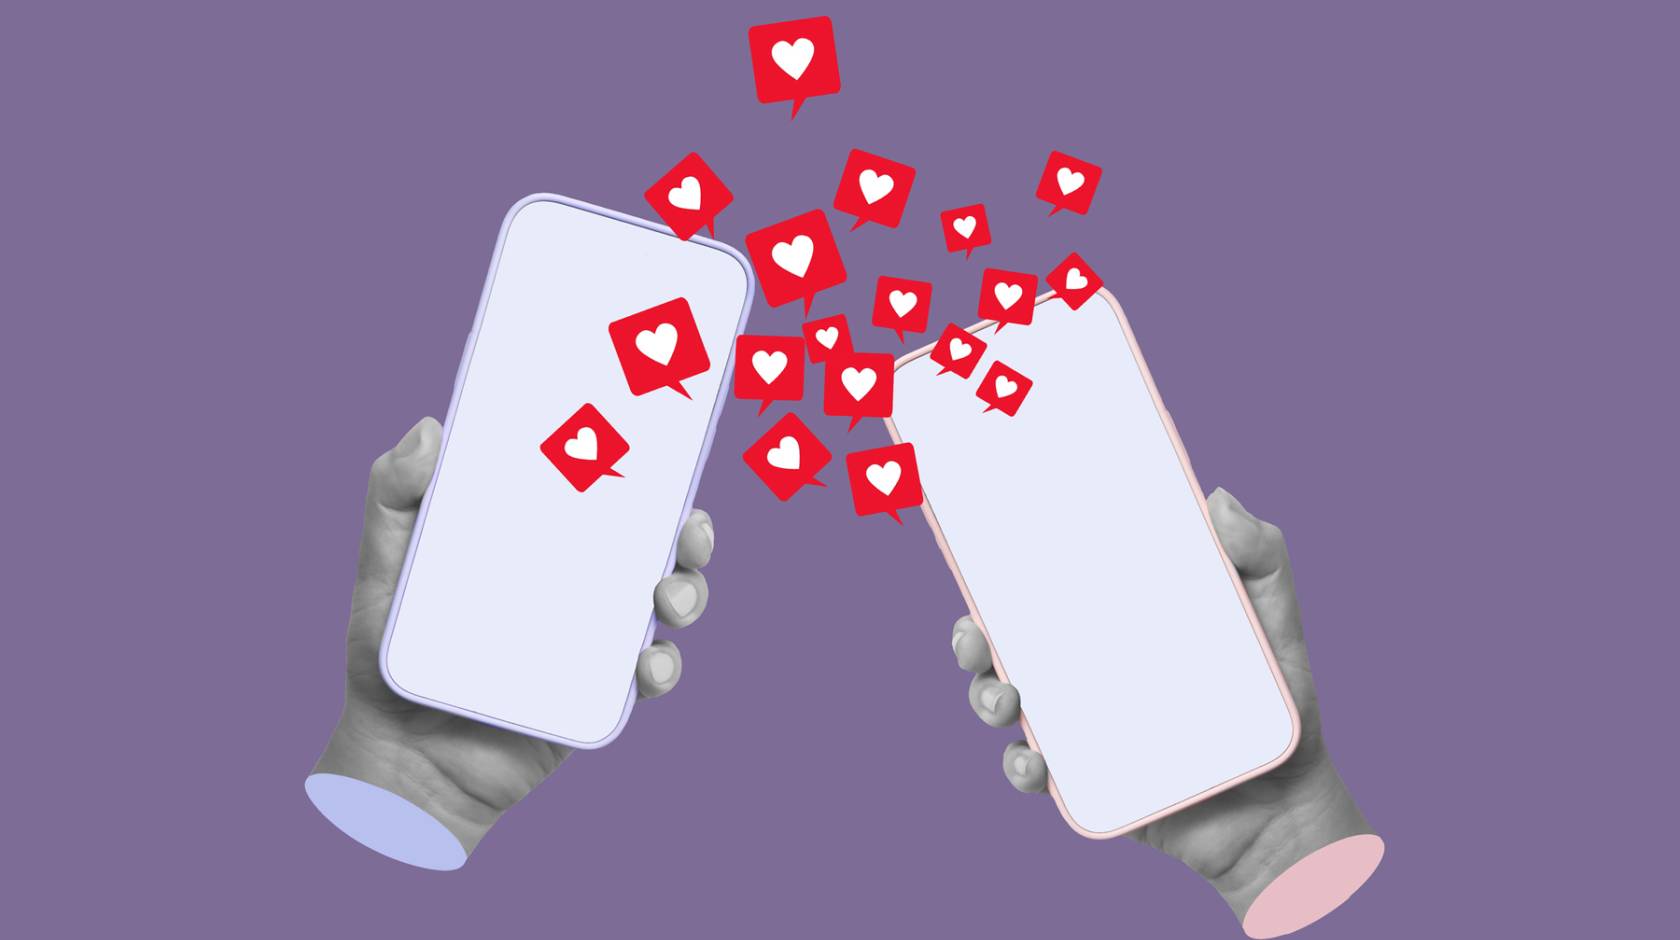 Two cell phones held by statues of hands have hearts coming from them